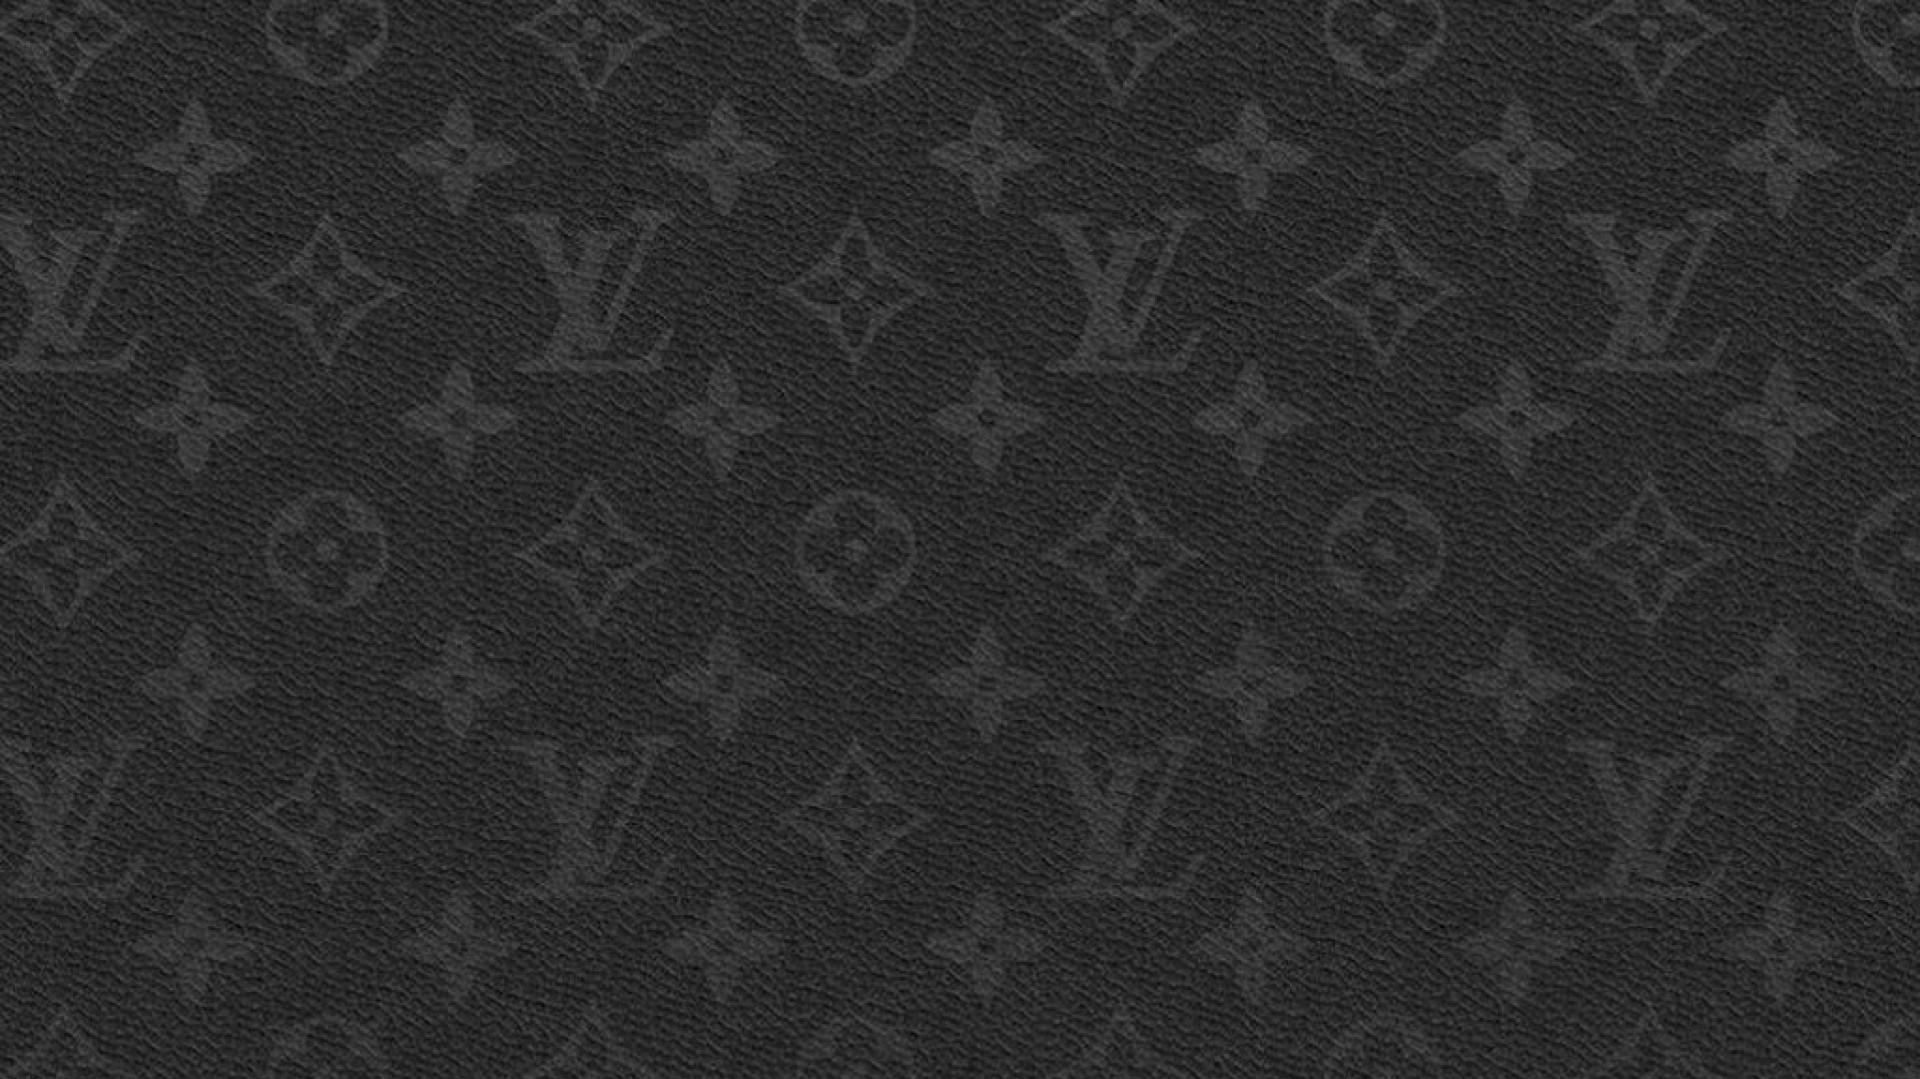 Louis Vuitton HD Wallpaper For Your